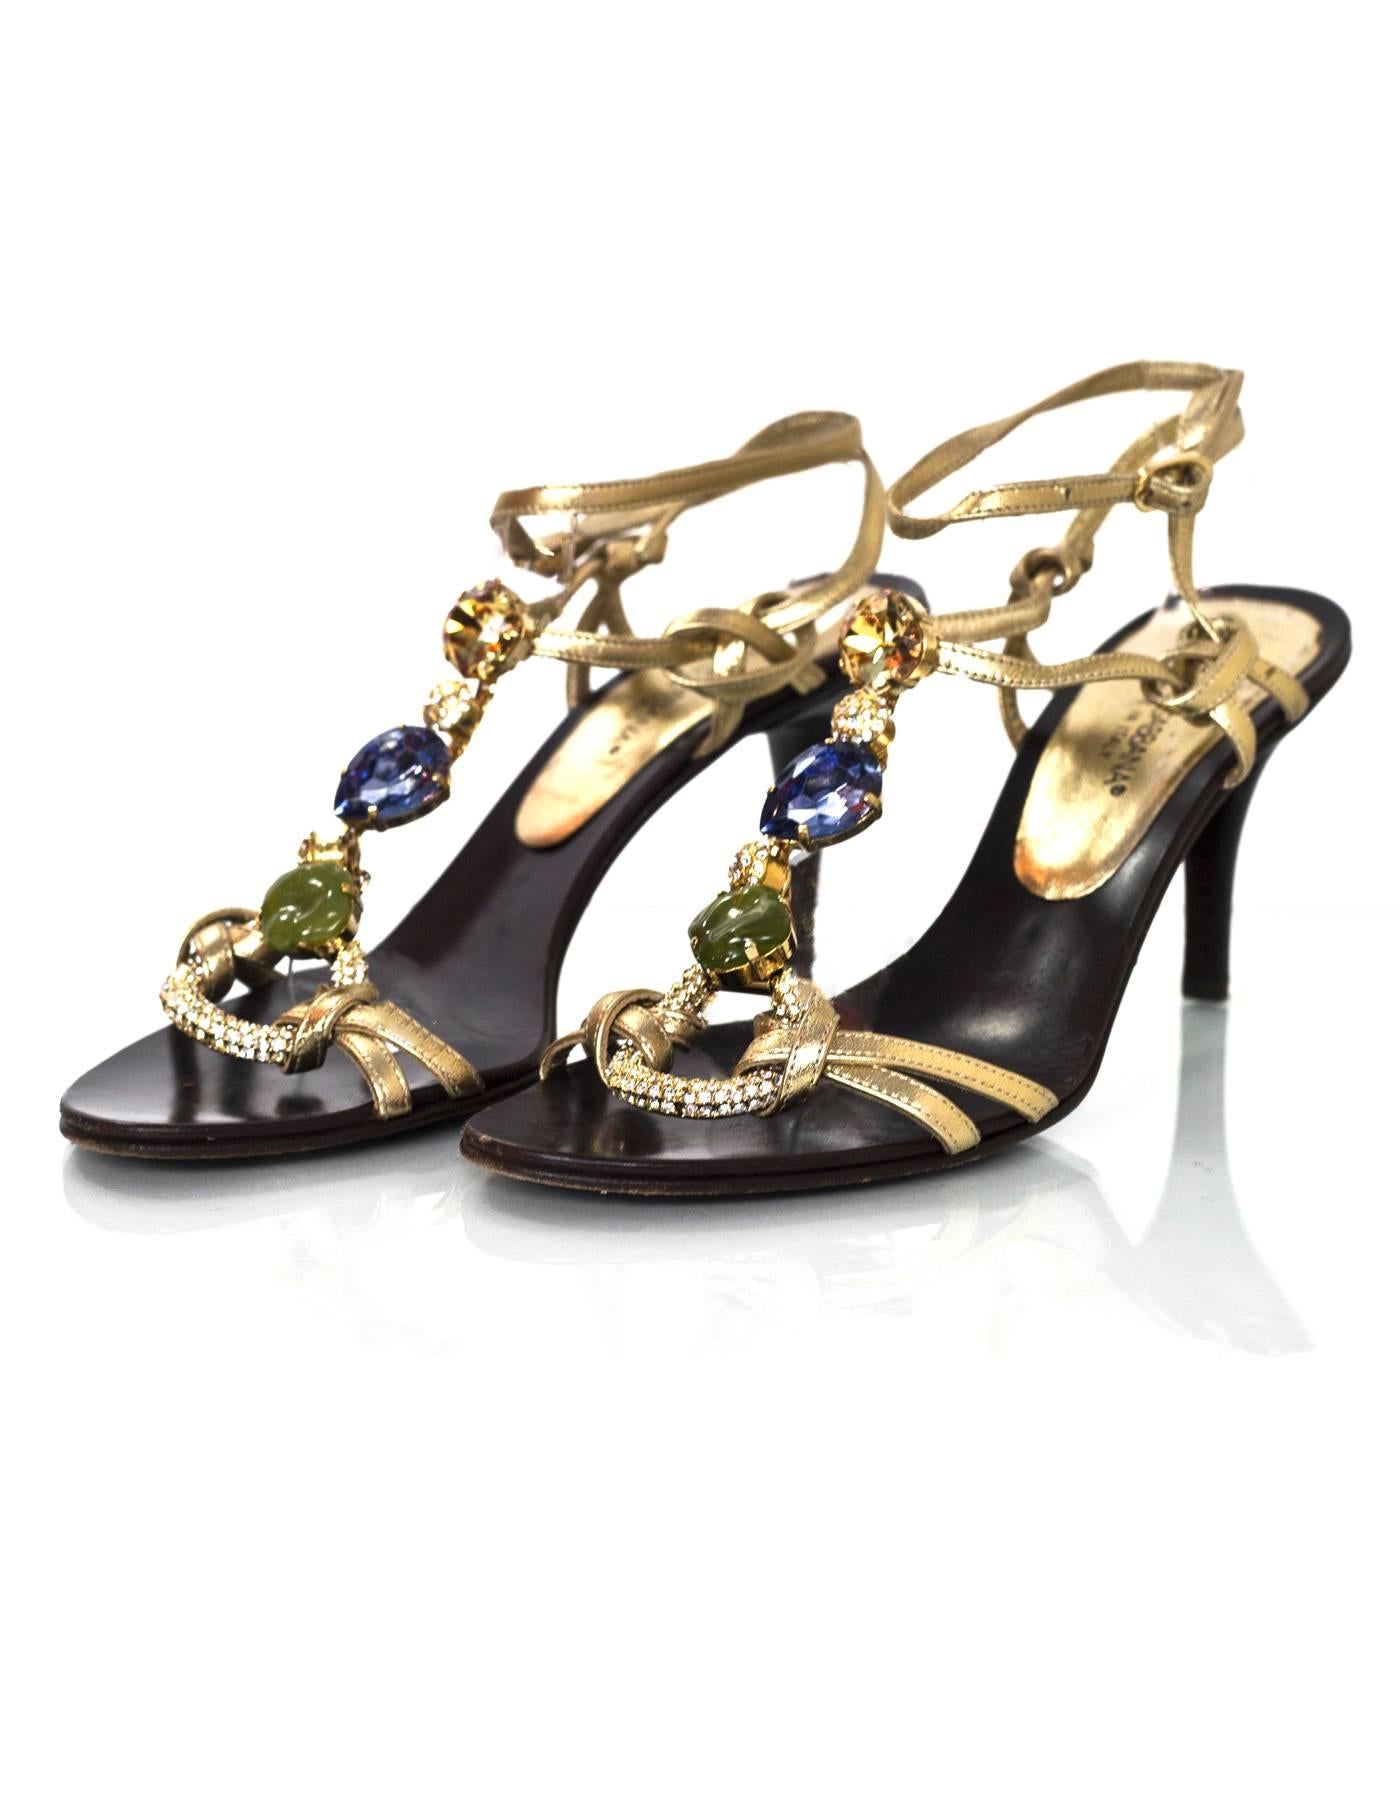 Dolce & Gabbana Jeweled T-Strap Sandals Sz 36.5

Made In: Italy
Color: Gold
Materials: Leather, pave crystal, stones
Closure/Opening: Buckle closure at ankle
Sole Stamp: Dole & Gabbana Vero Cuoio Made in Italy 36.5
Overall Condition: